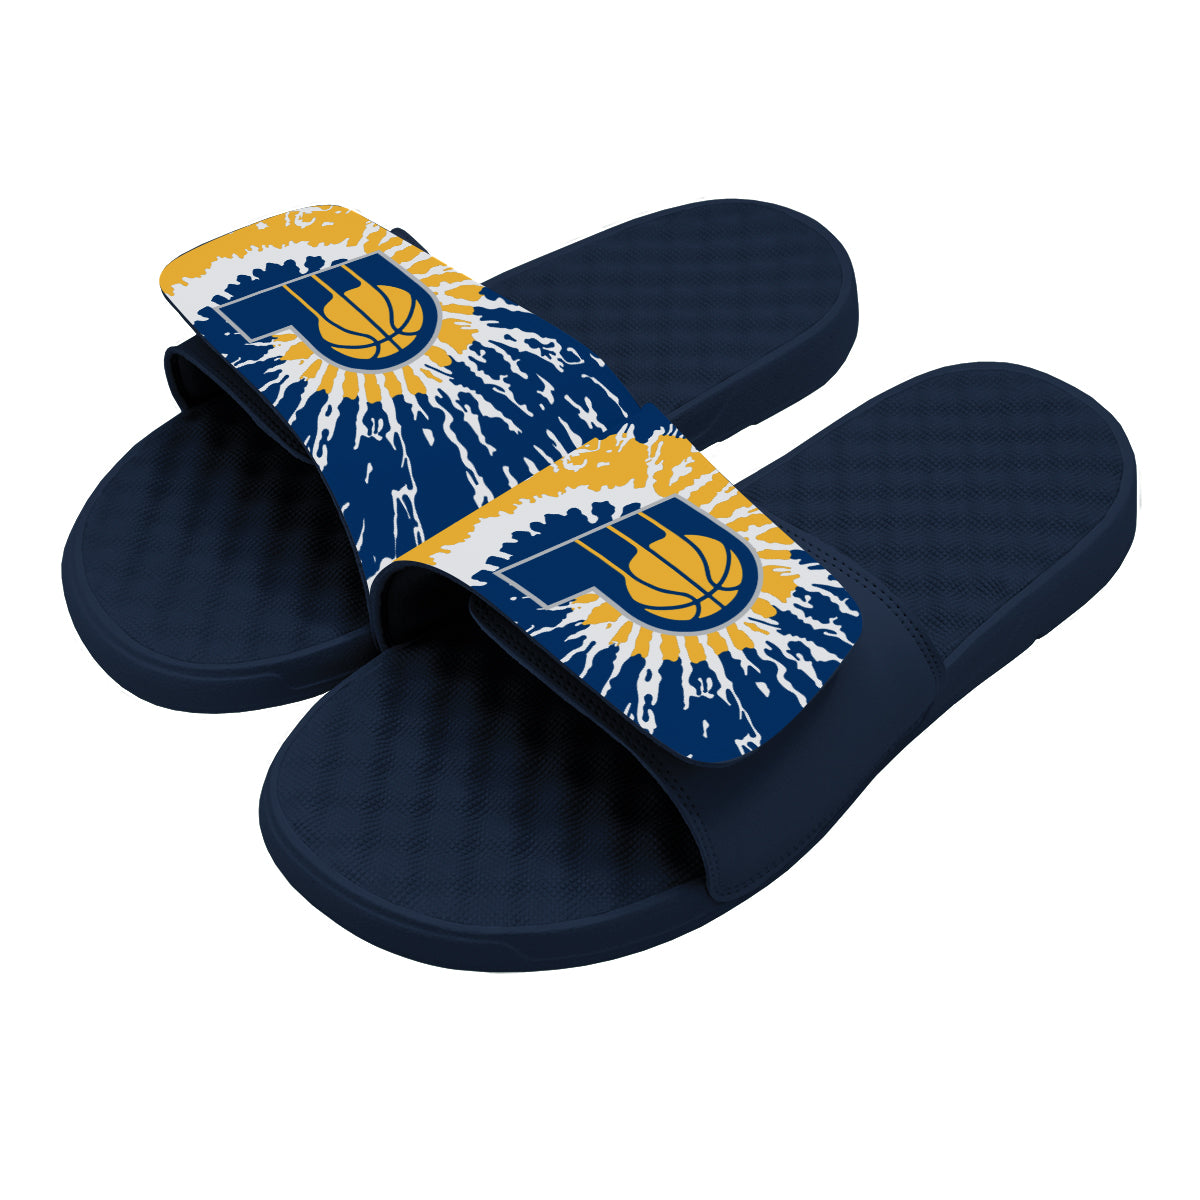 Indiana Pacers Slides